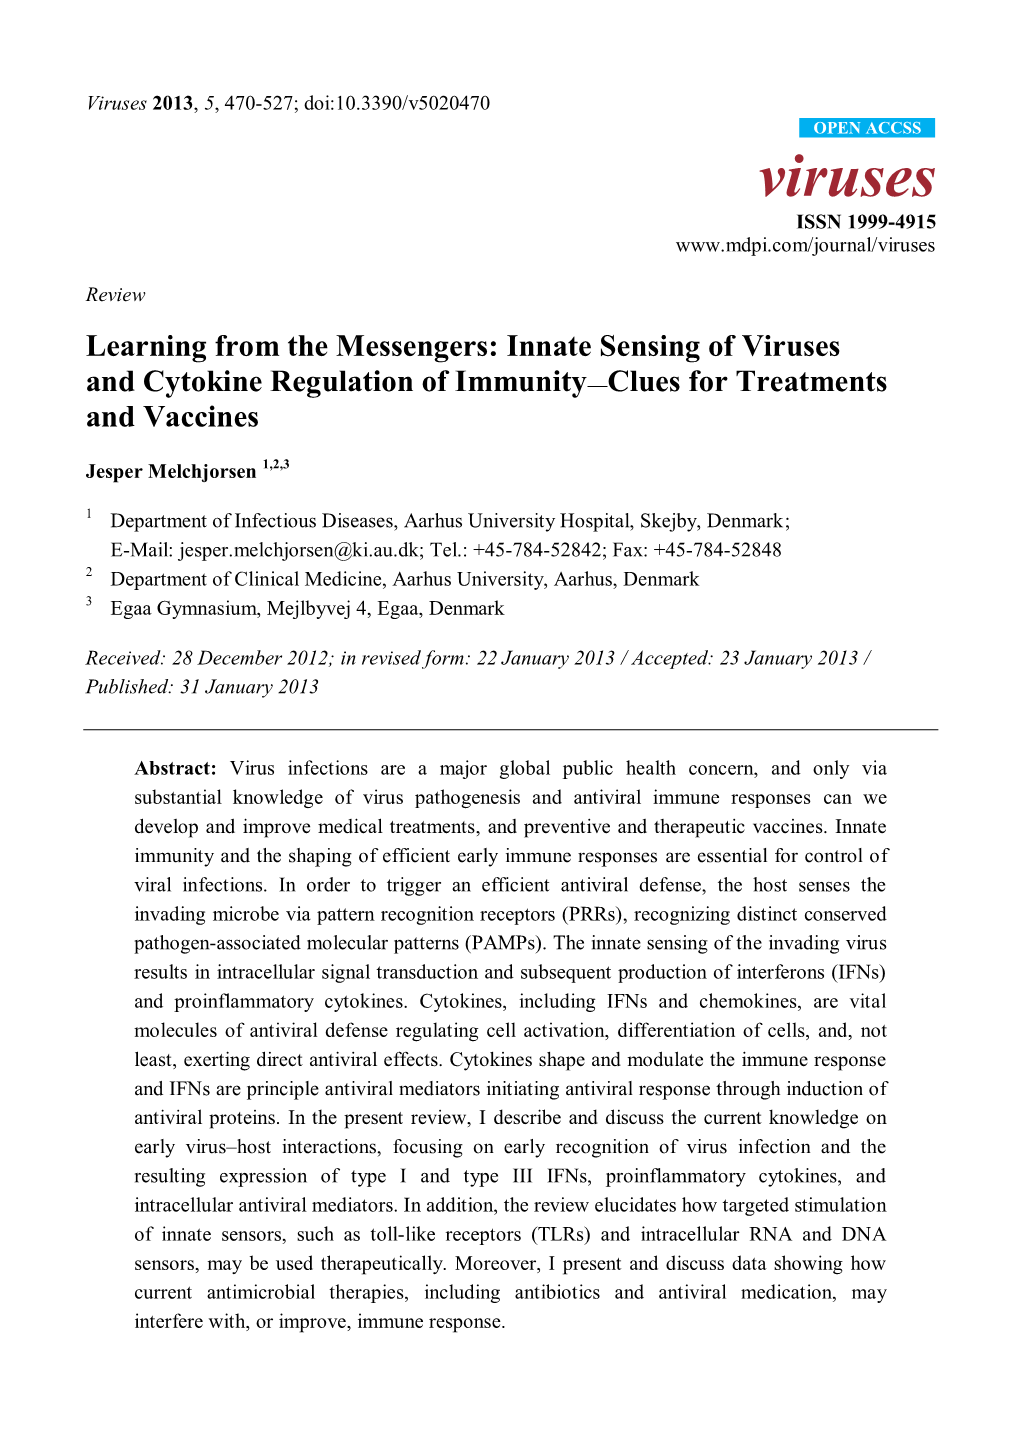 Learning from the Messengers: Innate Sensing of Viruses and Cytokine Regulation of Immunity—Clues for Treatments and Vaccines